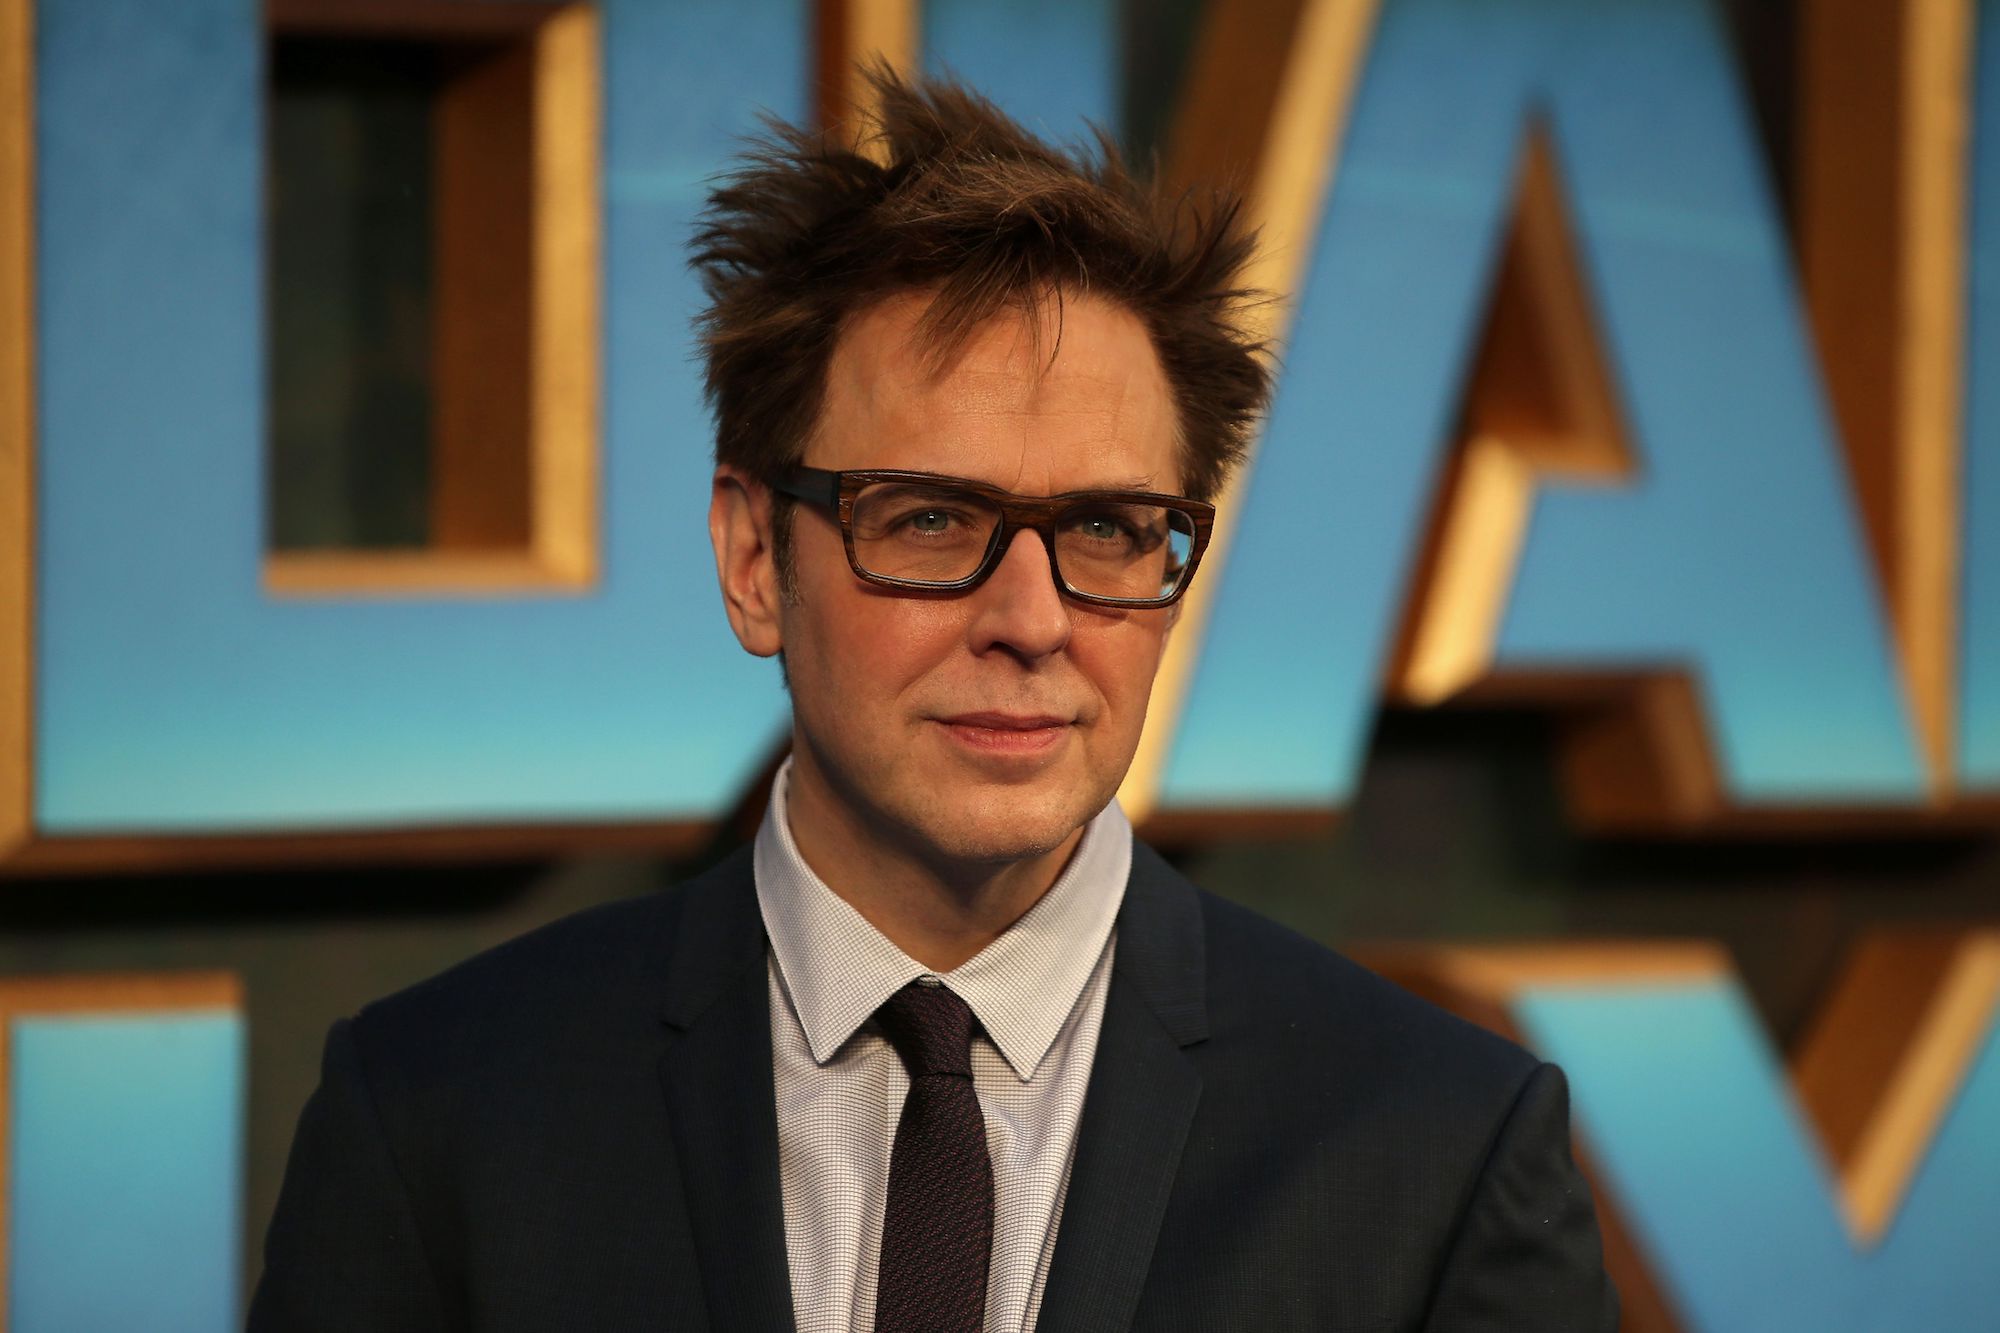 James Gunn at the European Gala screening of 'Guardians of the Galaxy Vol. 2' in London on April 24, 2017.